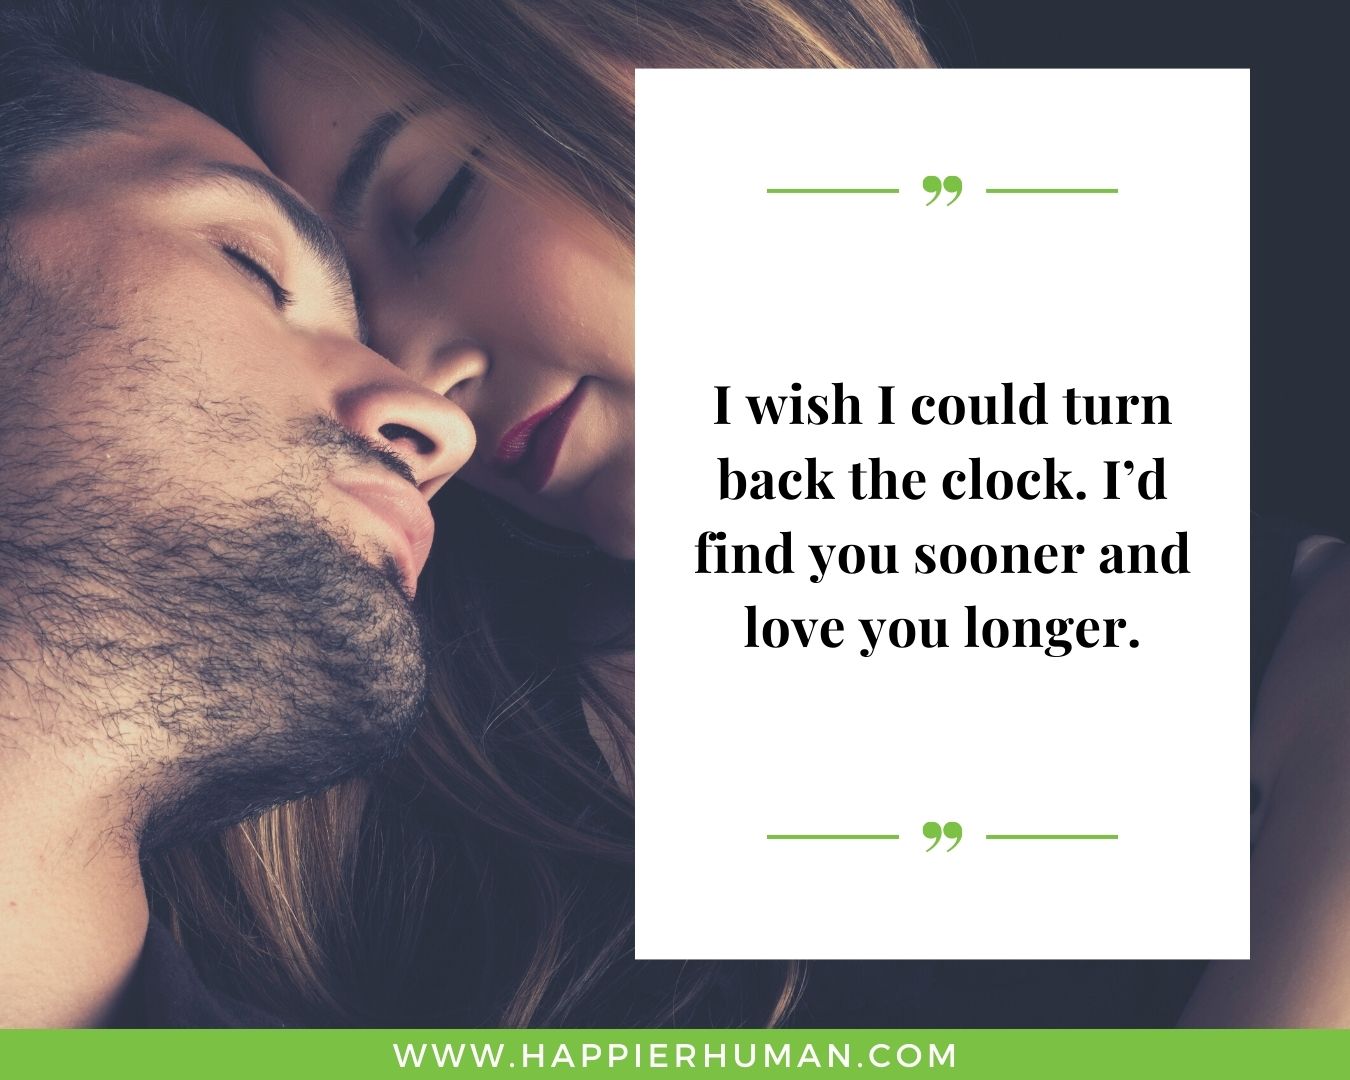 Inspiring relationship quotes for women- “I wish I could turn back the clock. I’d find you sooner and love you longer.”